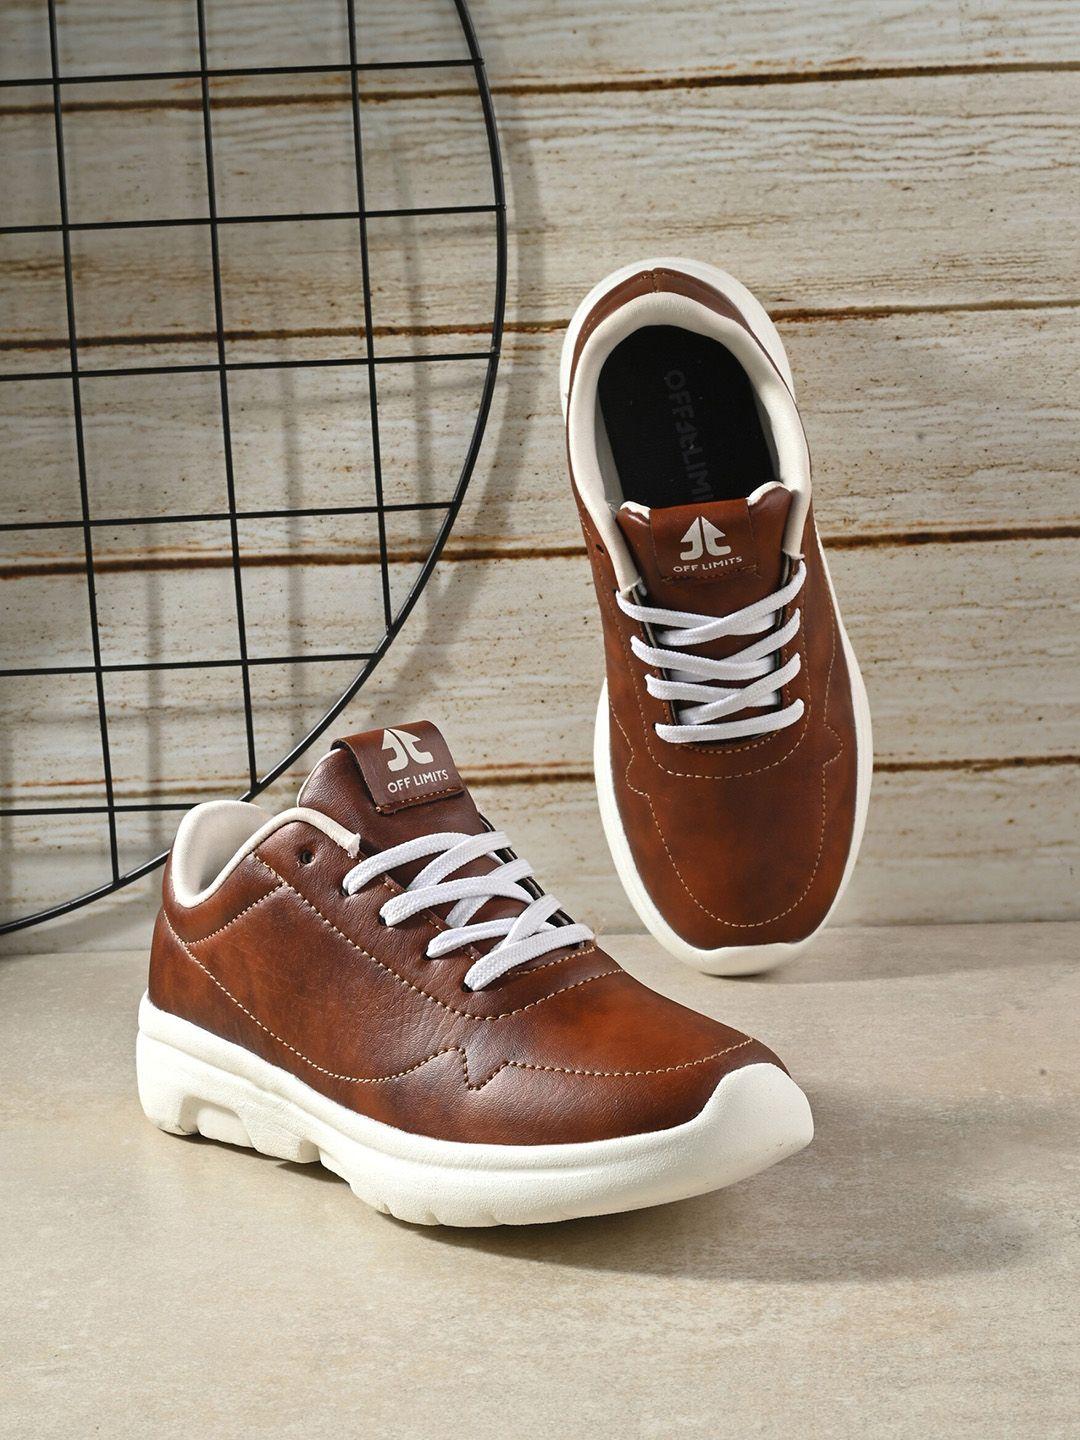 off-limits-boys-lightweight-contrast-sole-sneakers